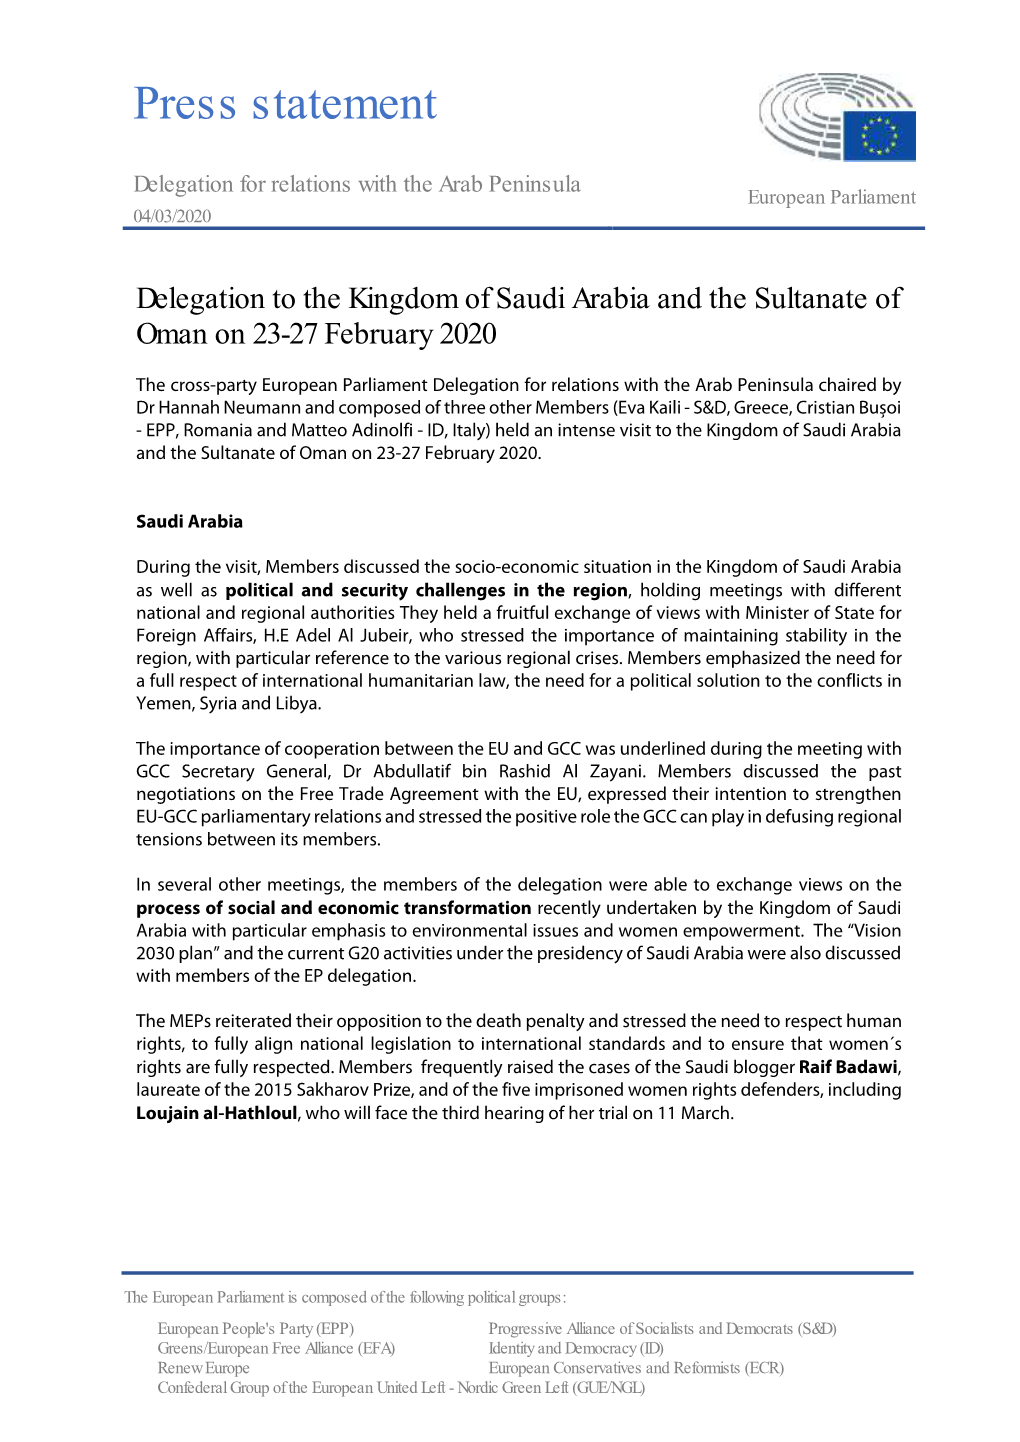 Press Statement on the Delegation to the KSA and Oman on 23-27